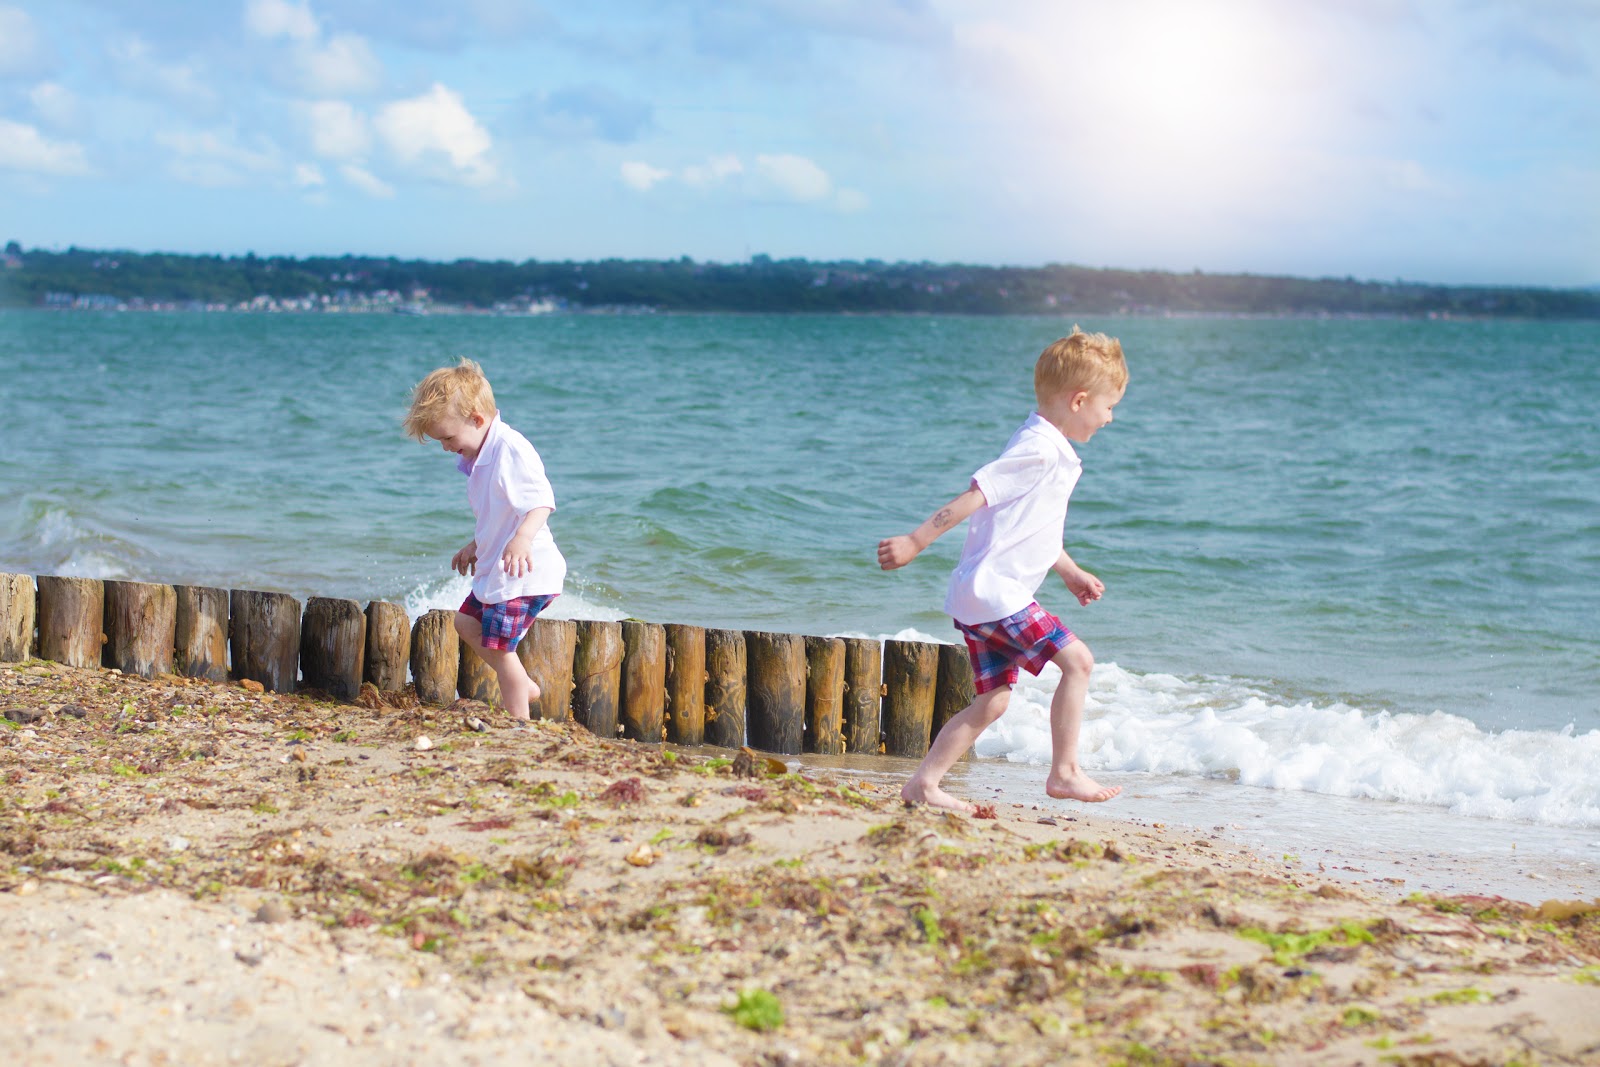 RED, WHITE…AND THE DEEP BLUE [LEPE BEACH]